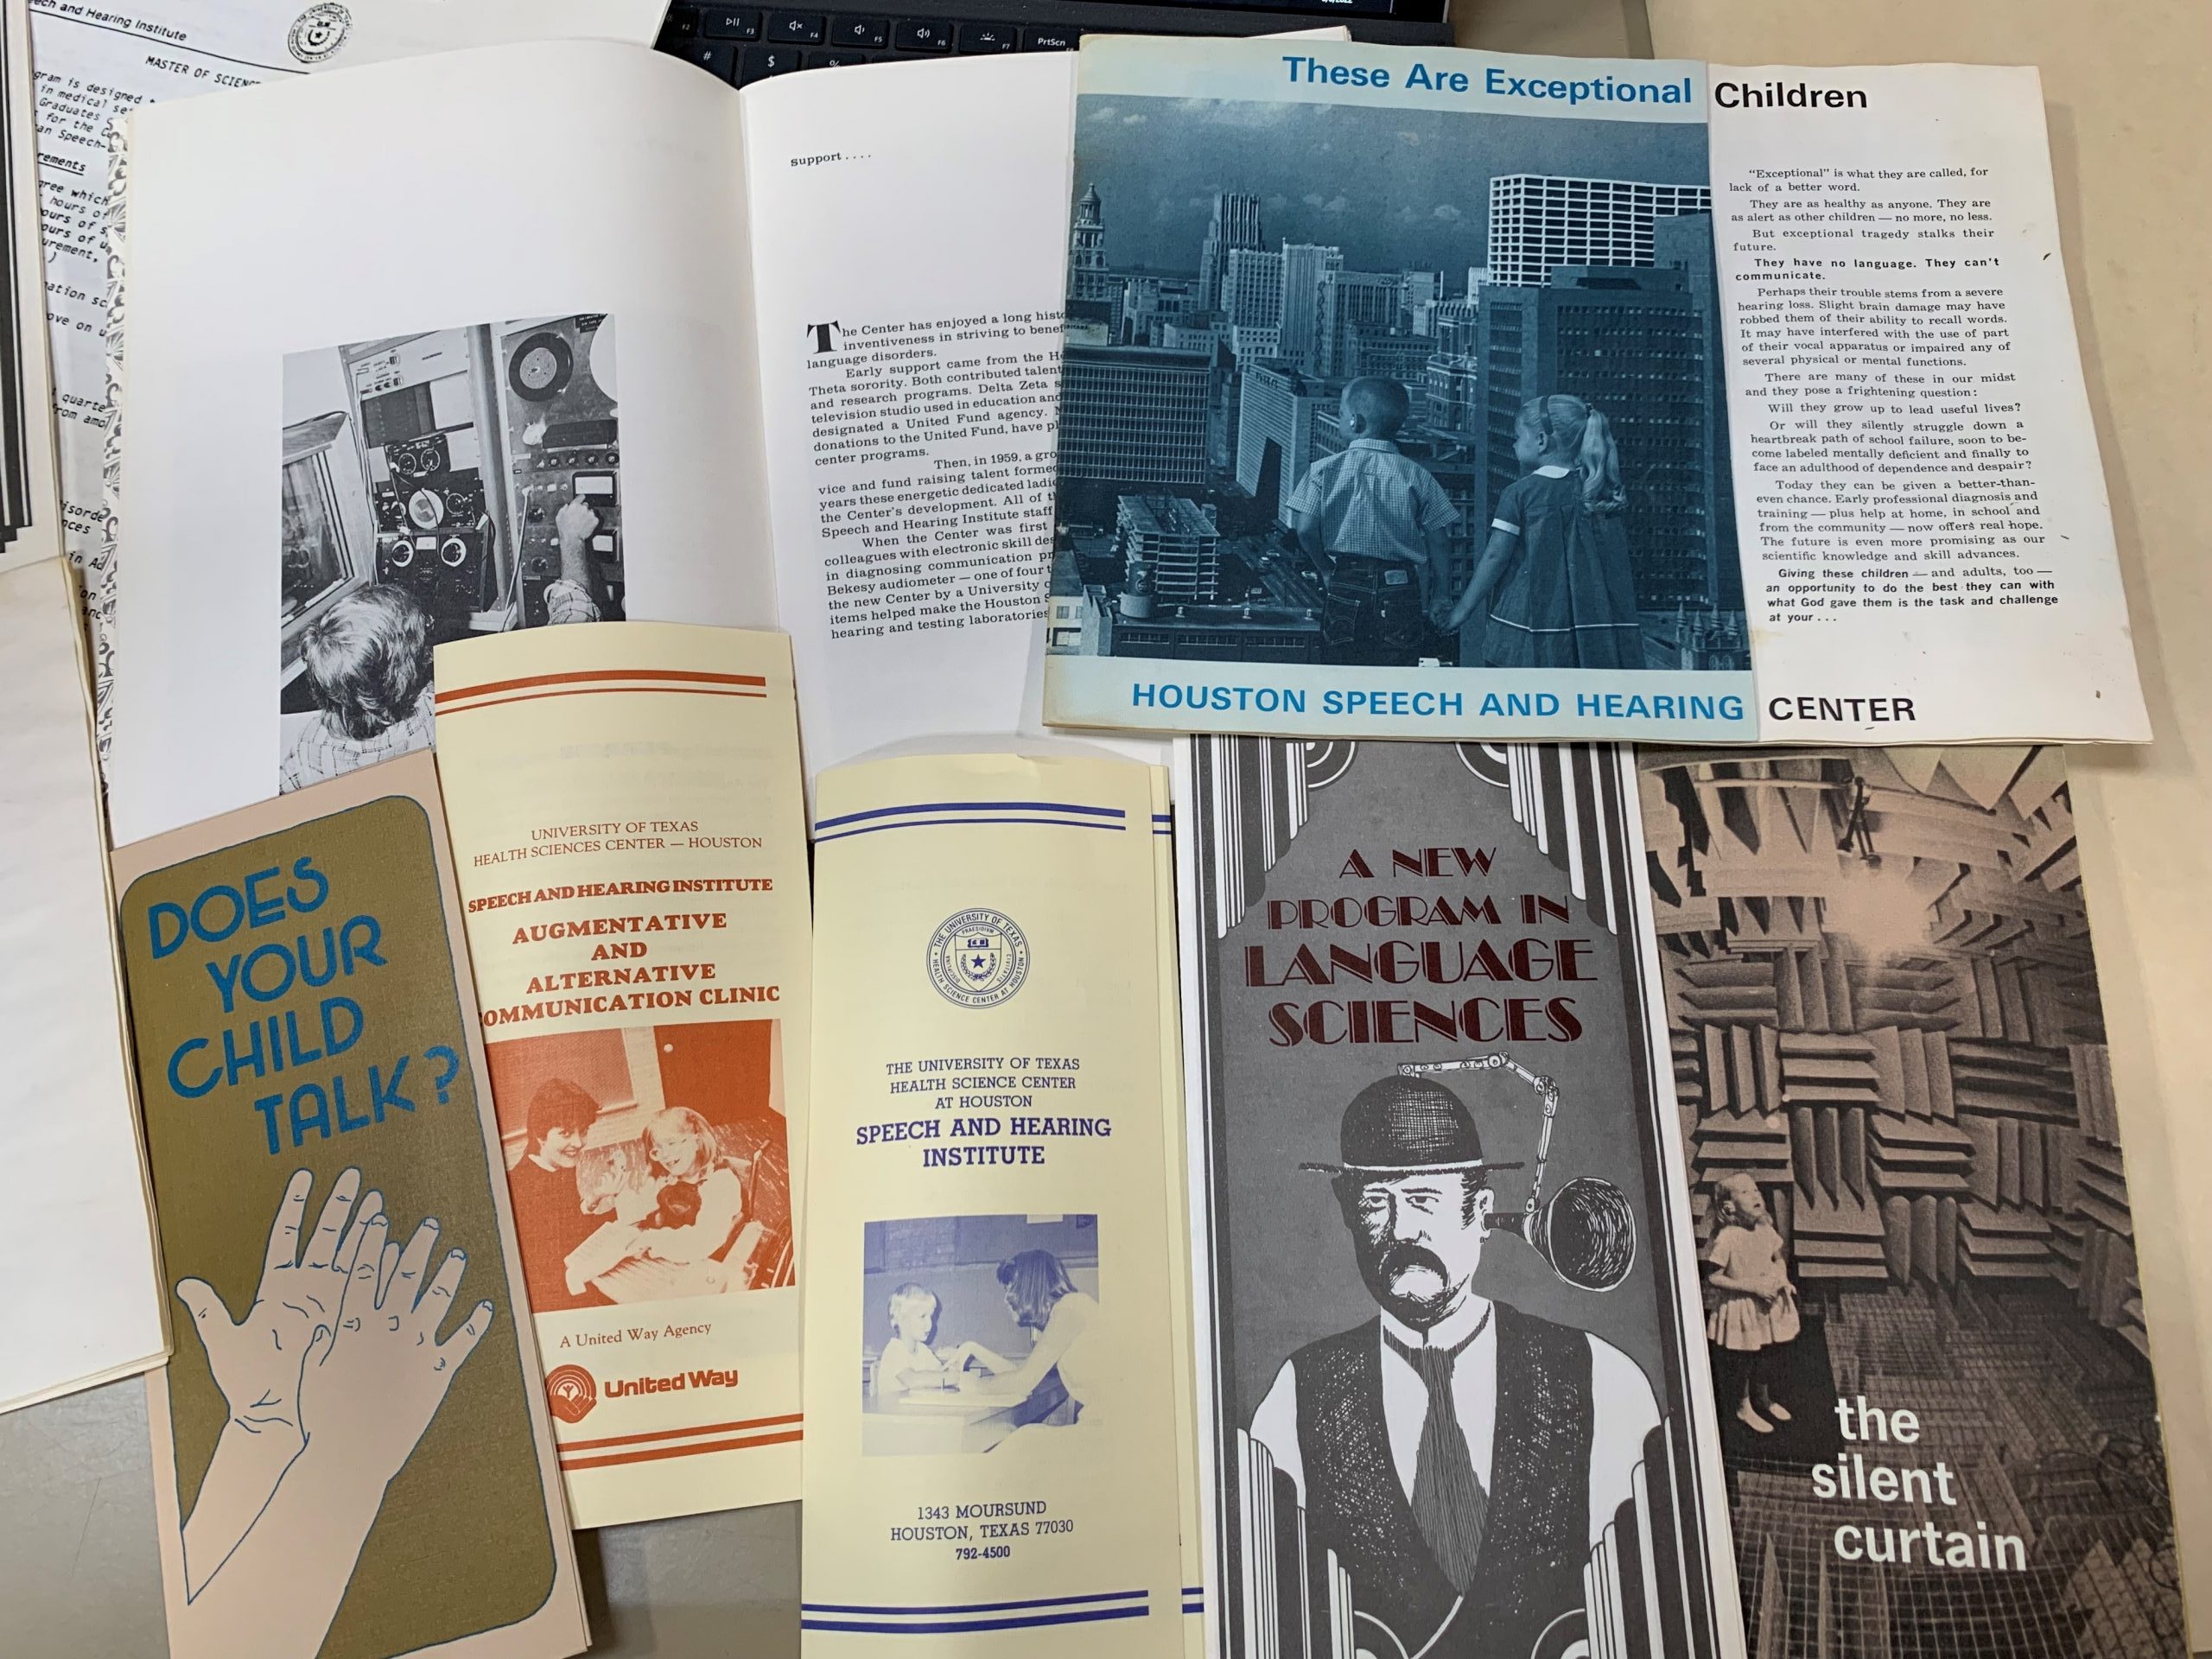 UT Speech and Hearing Institute Brochures, 1972 or later, IC 012, McGovern Historical Center, TMC Library